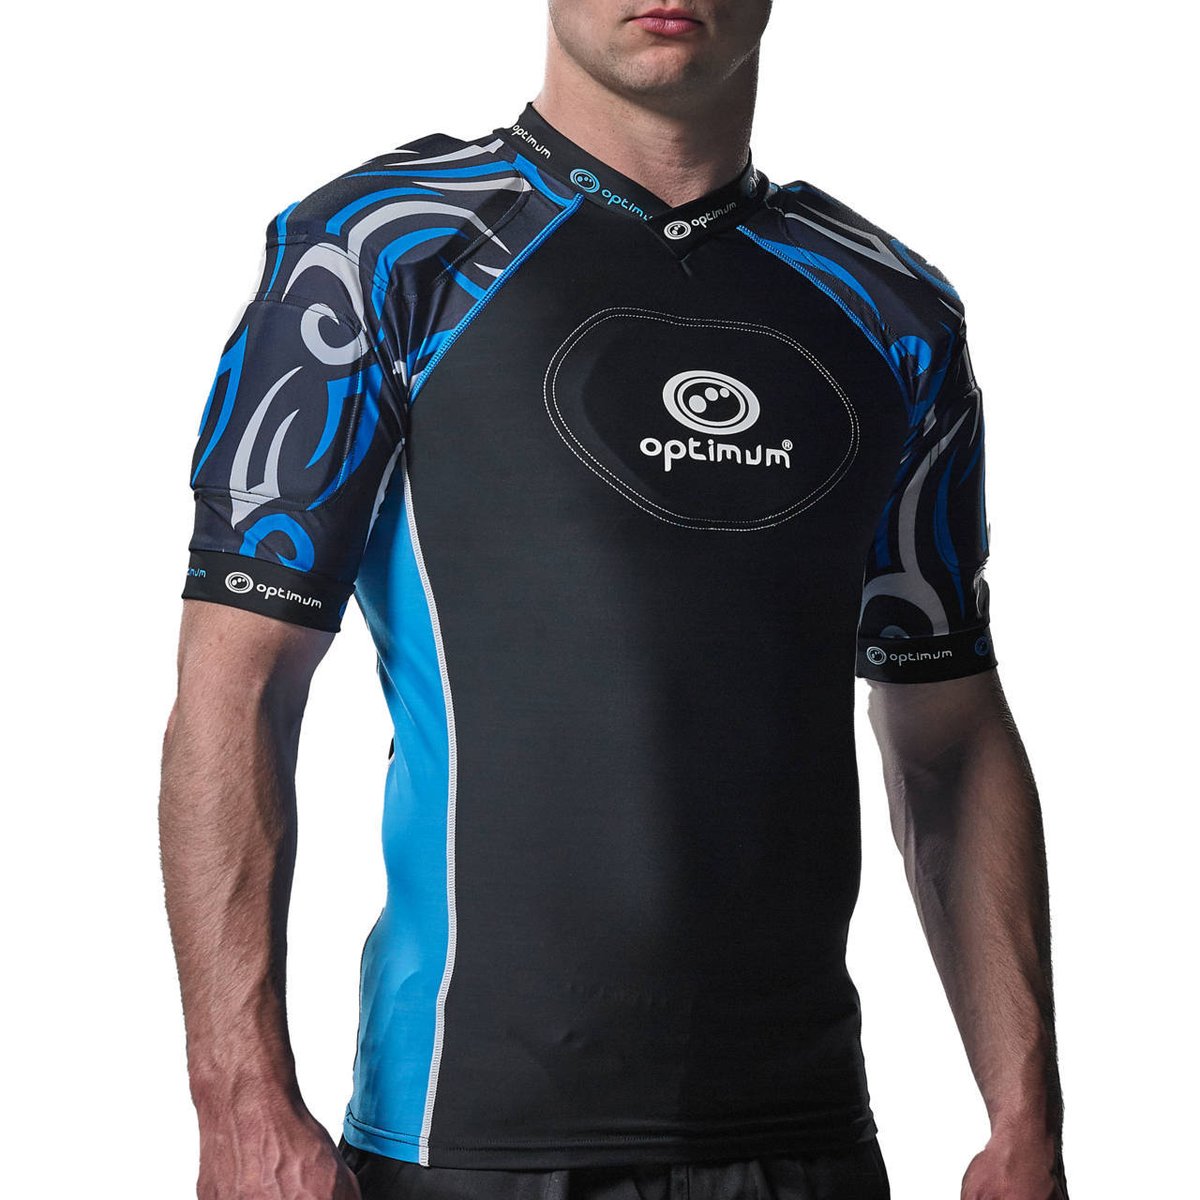 The Optimum Razor protective top provides full-length lightweight Lycra, with strategically placed e.V.A. Padding on shoulders, sternum, and biceps for maximum protection which can be easily removed for washing. 
https://t.co/dkUj52Mh1n https://t.co/Hsuvdnh1xw